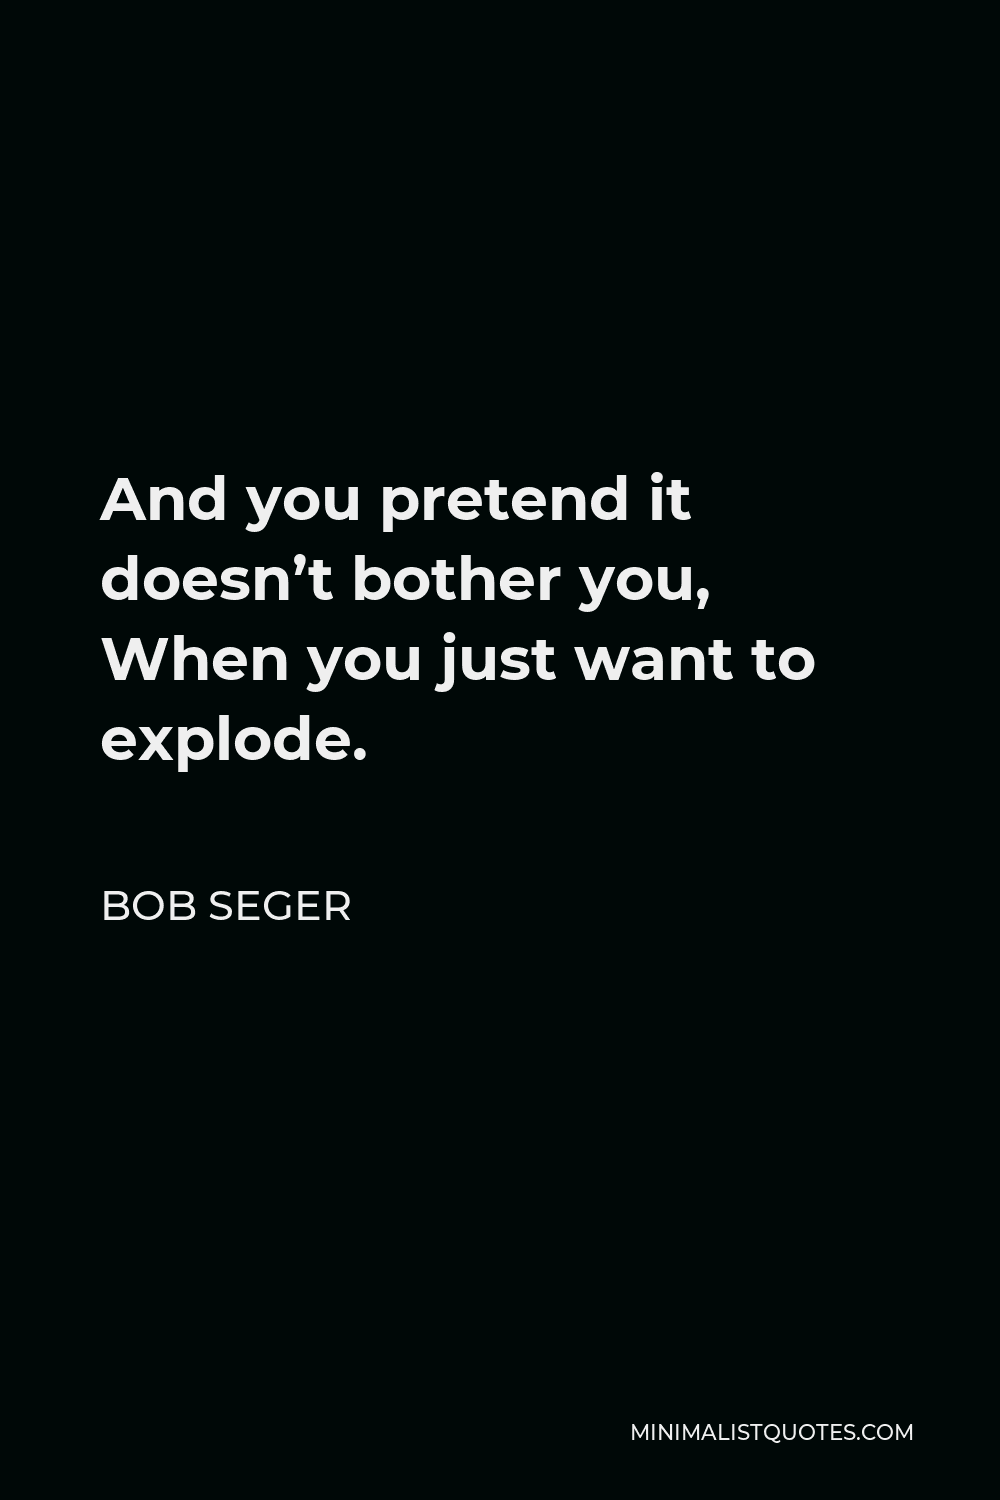 Bob Seger Quote - And you pretend it doesn’t bother you, When you just want to explode.